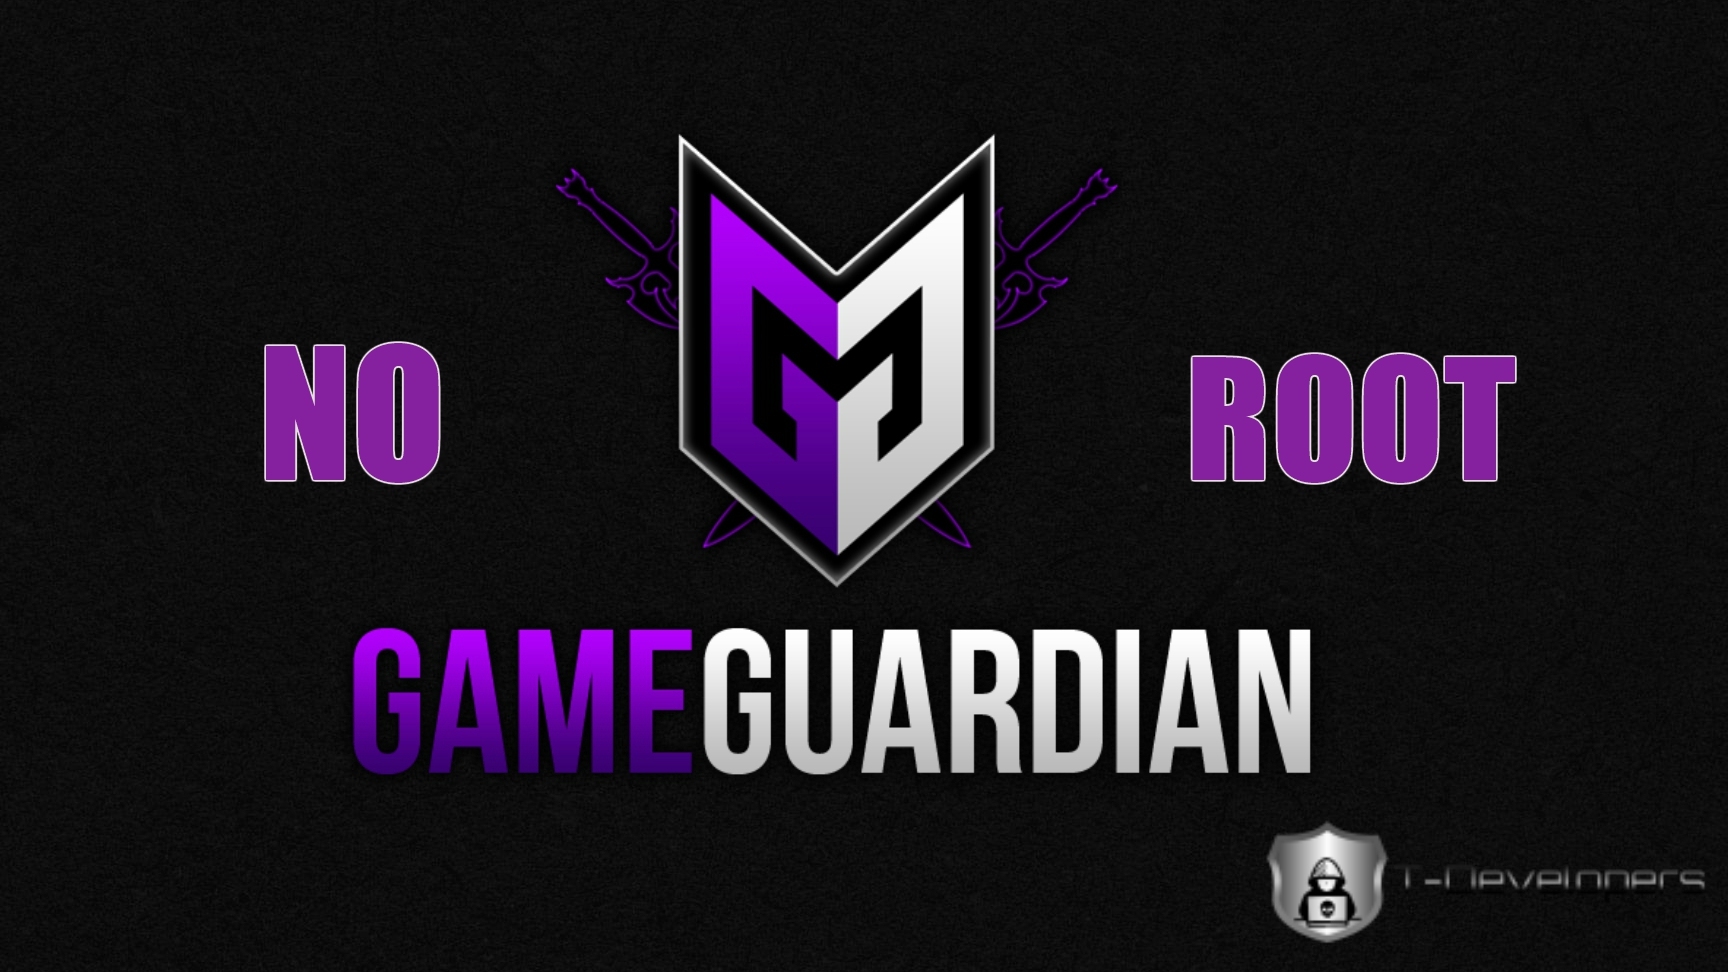 Game guardian для кар. Гаме гуардиан. Гейм гуардиан. GAMEGUARDIAN Official. Guardian v.